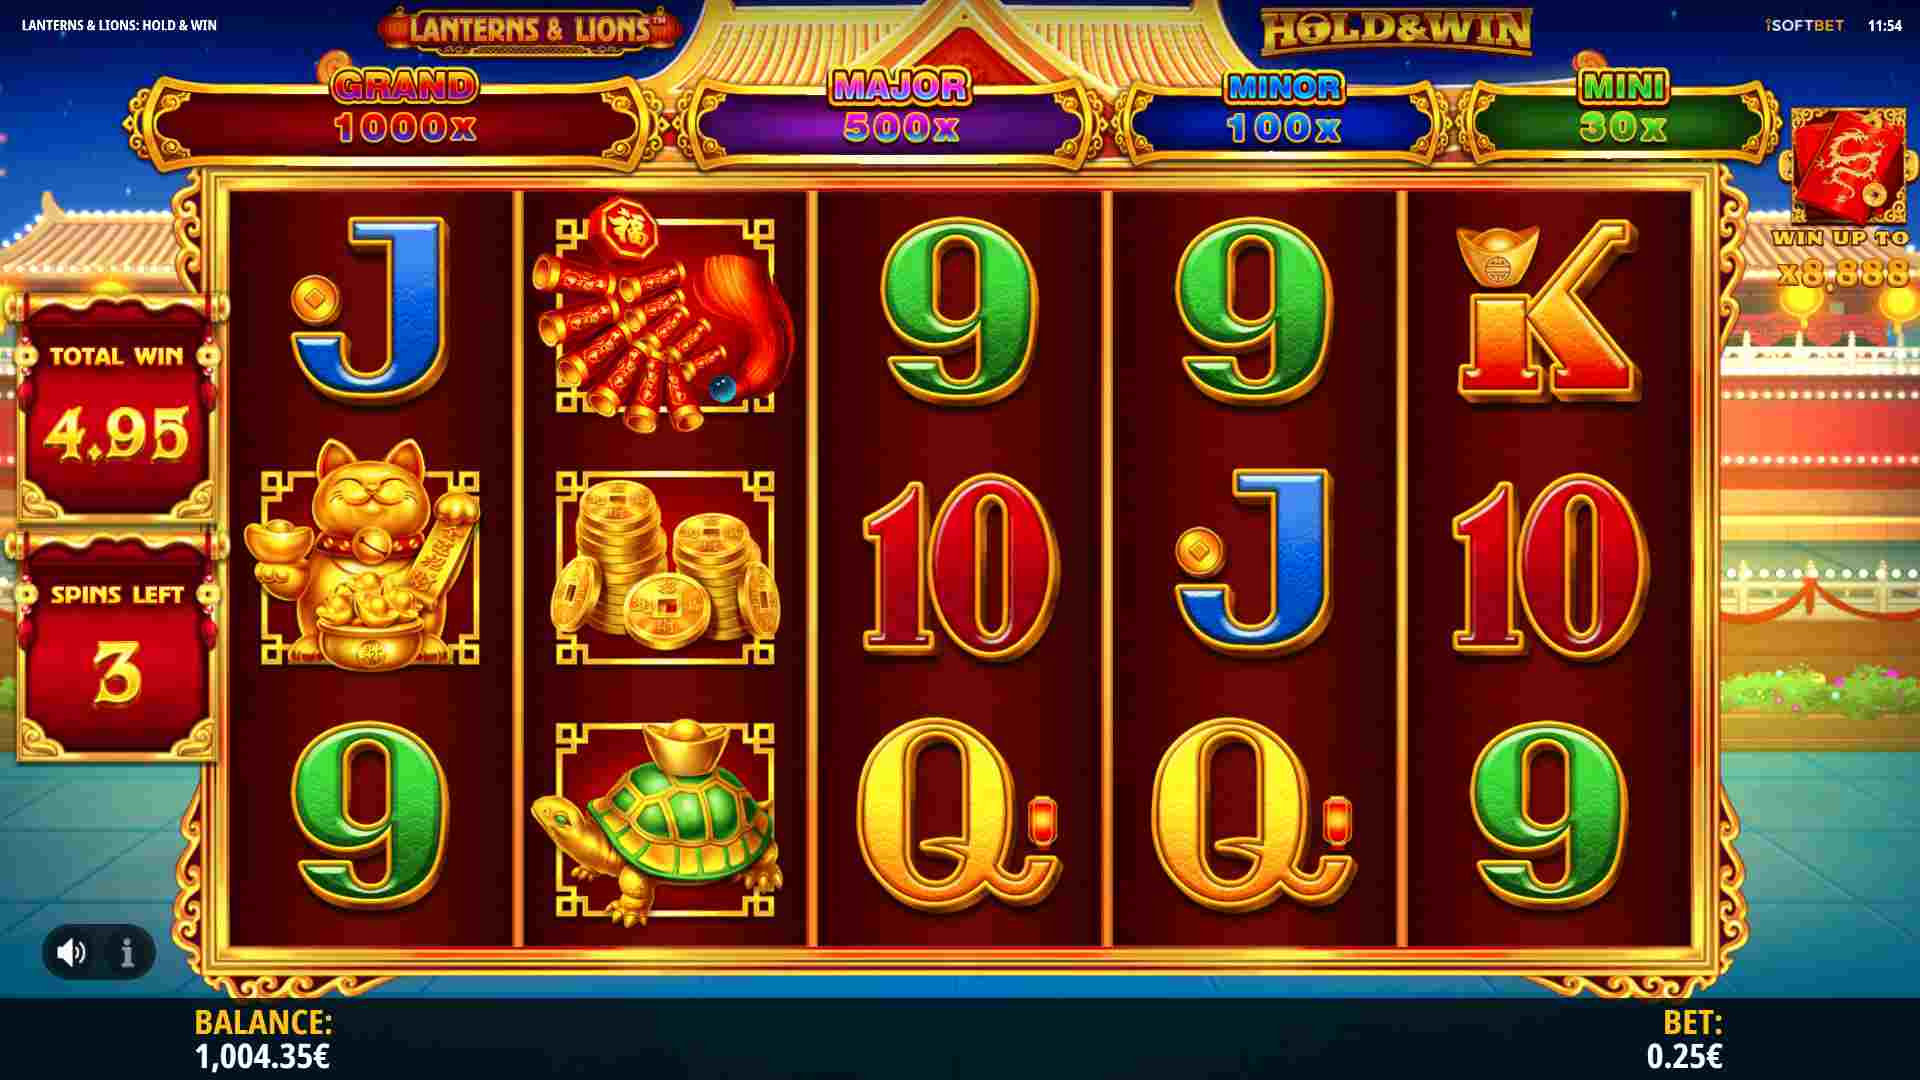 Lanterns & Lions Hold & Win Free Spins